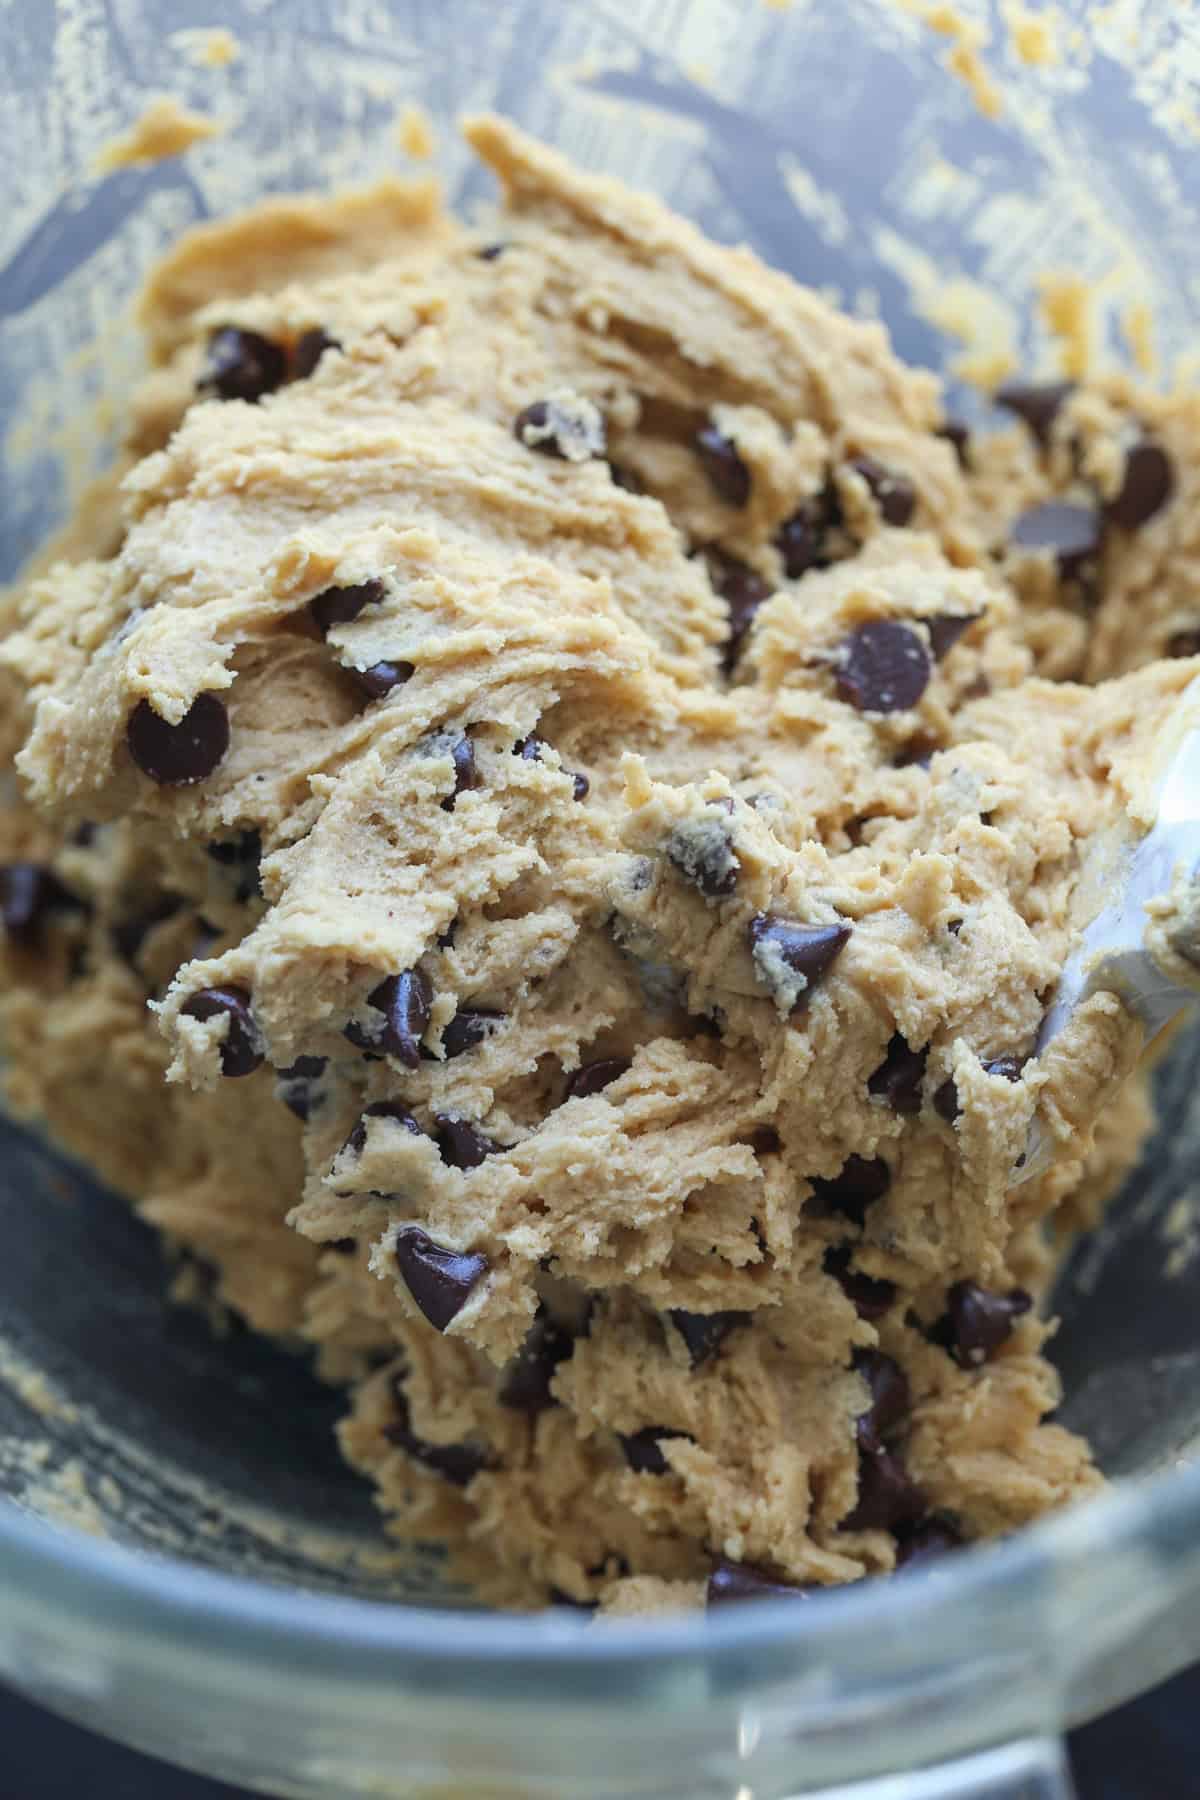 Peanut butter cookie dough with chocolate chips in a clear mixing bowl